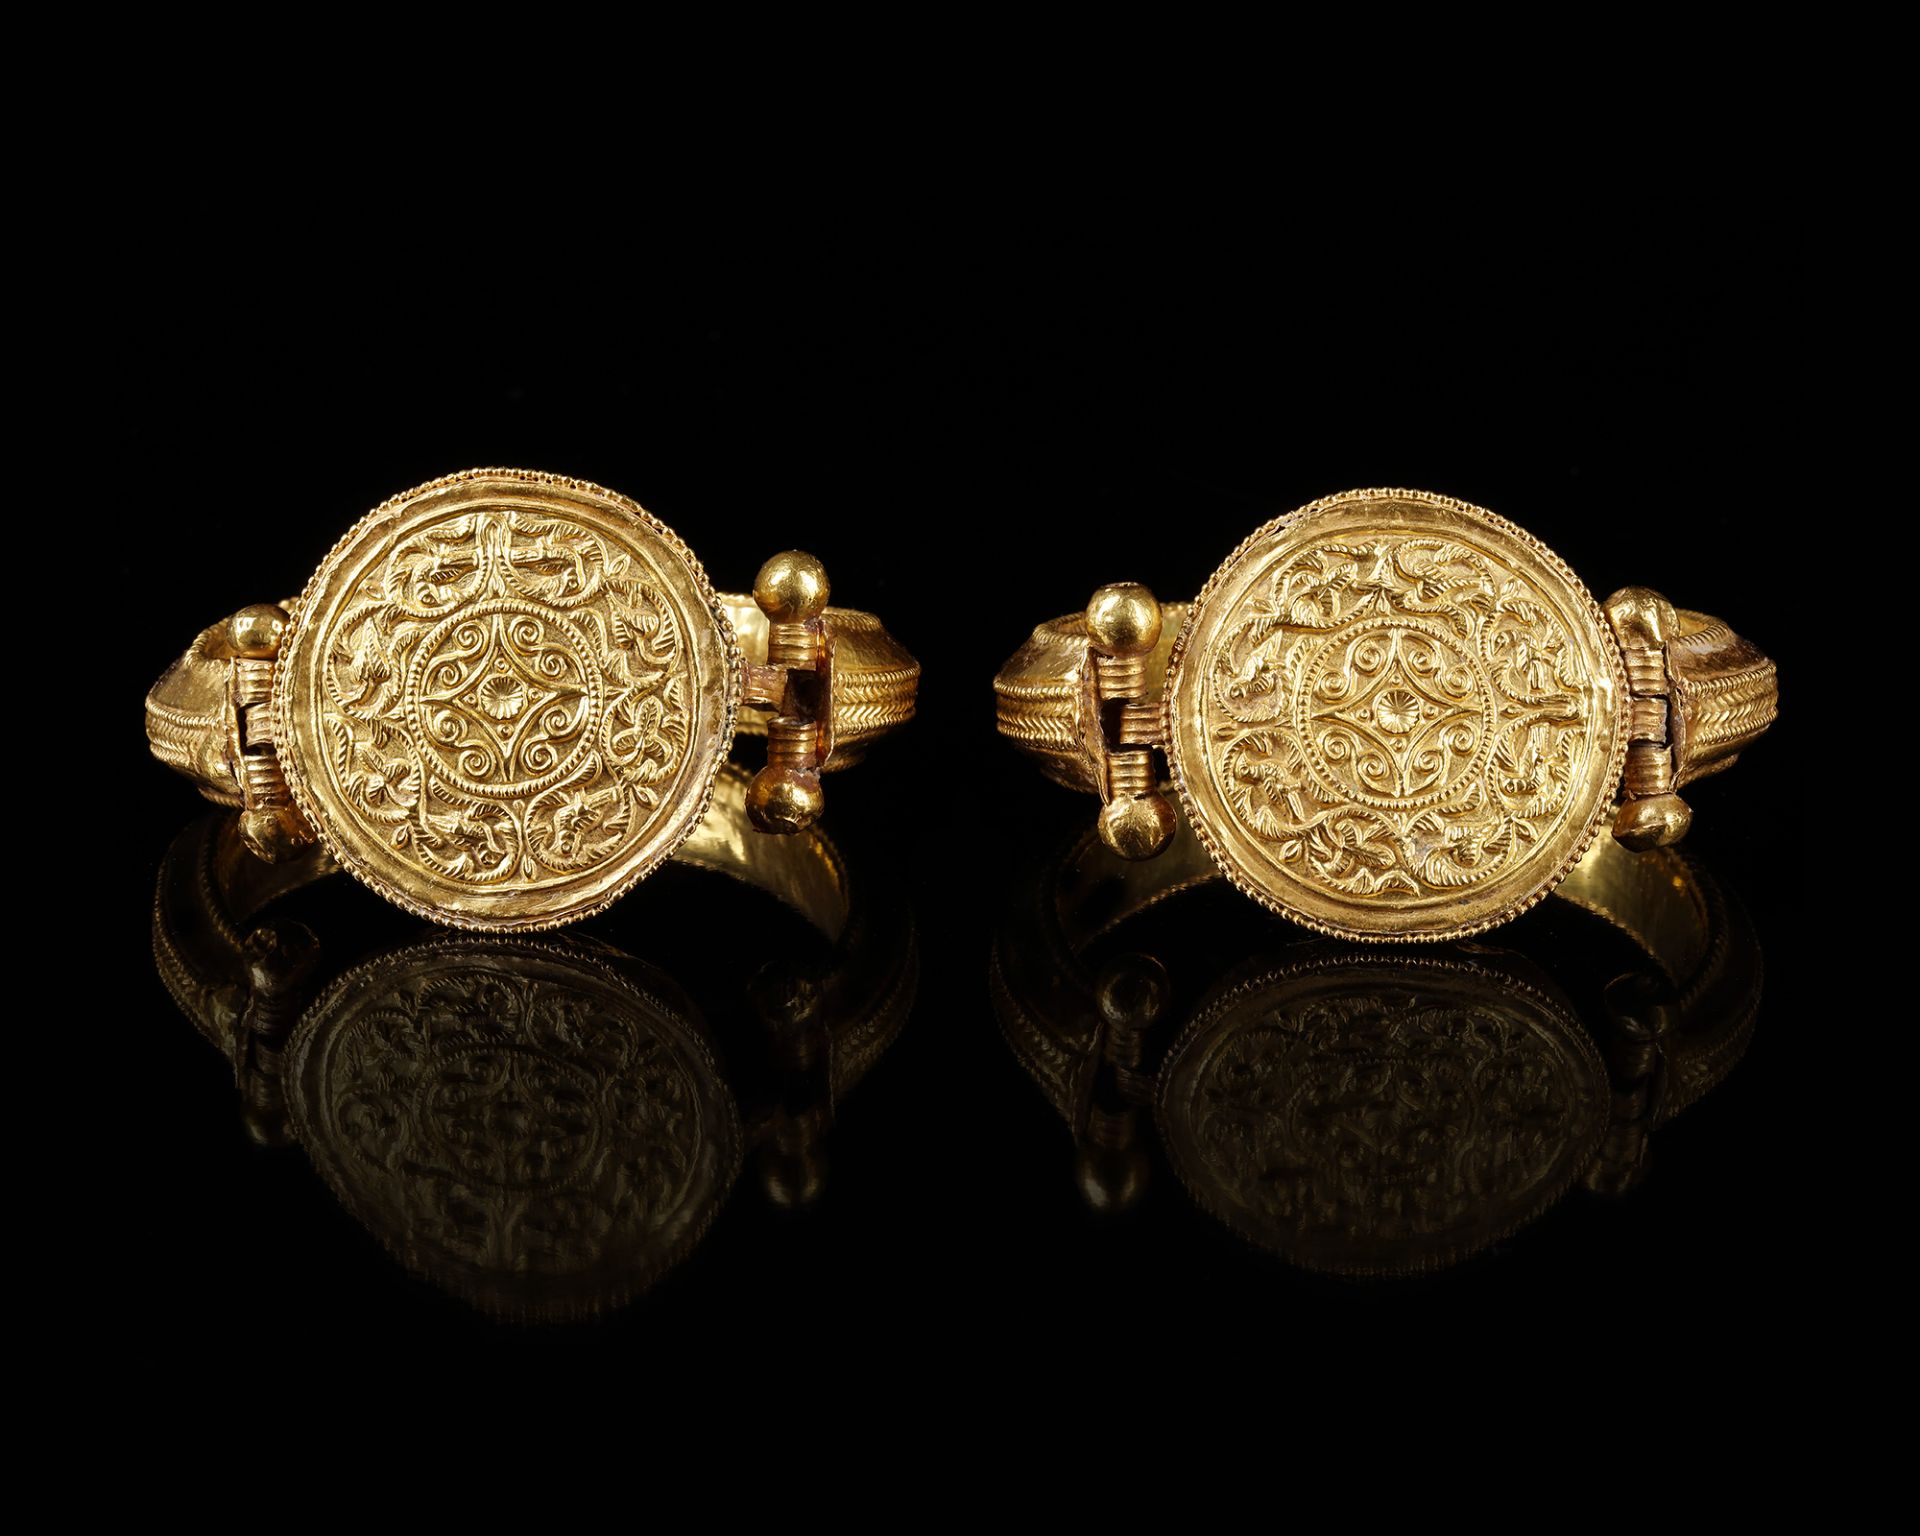 A RARE PAIR OF A FATIMID GOLD BRACELETS, POSSIBLY SYRIA, 11TH CENTURY - Image 2 of 14